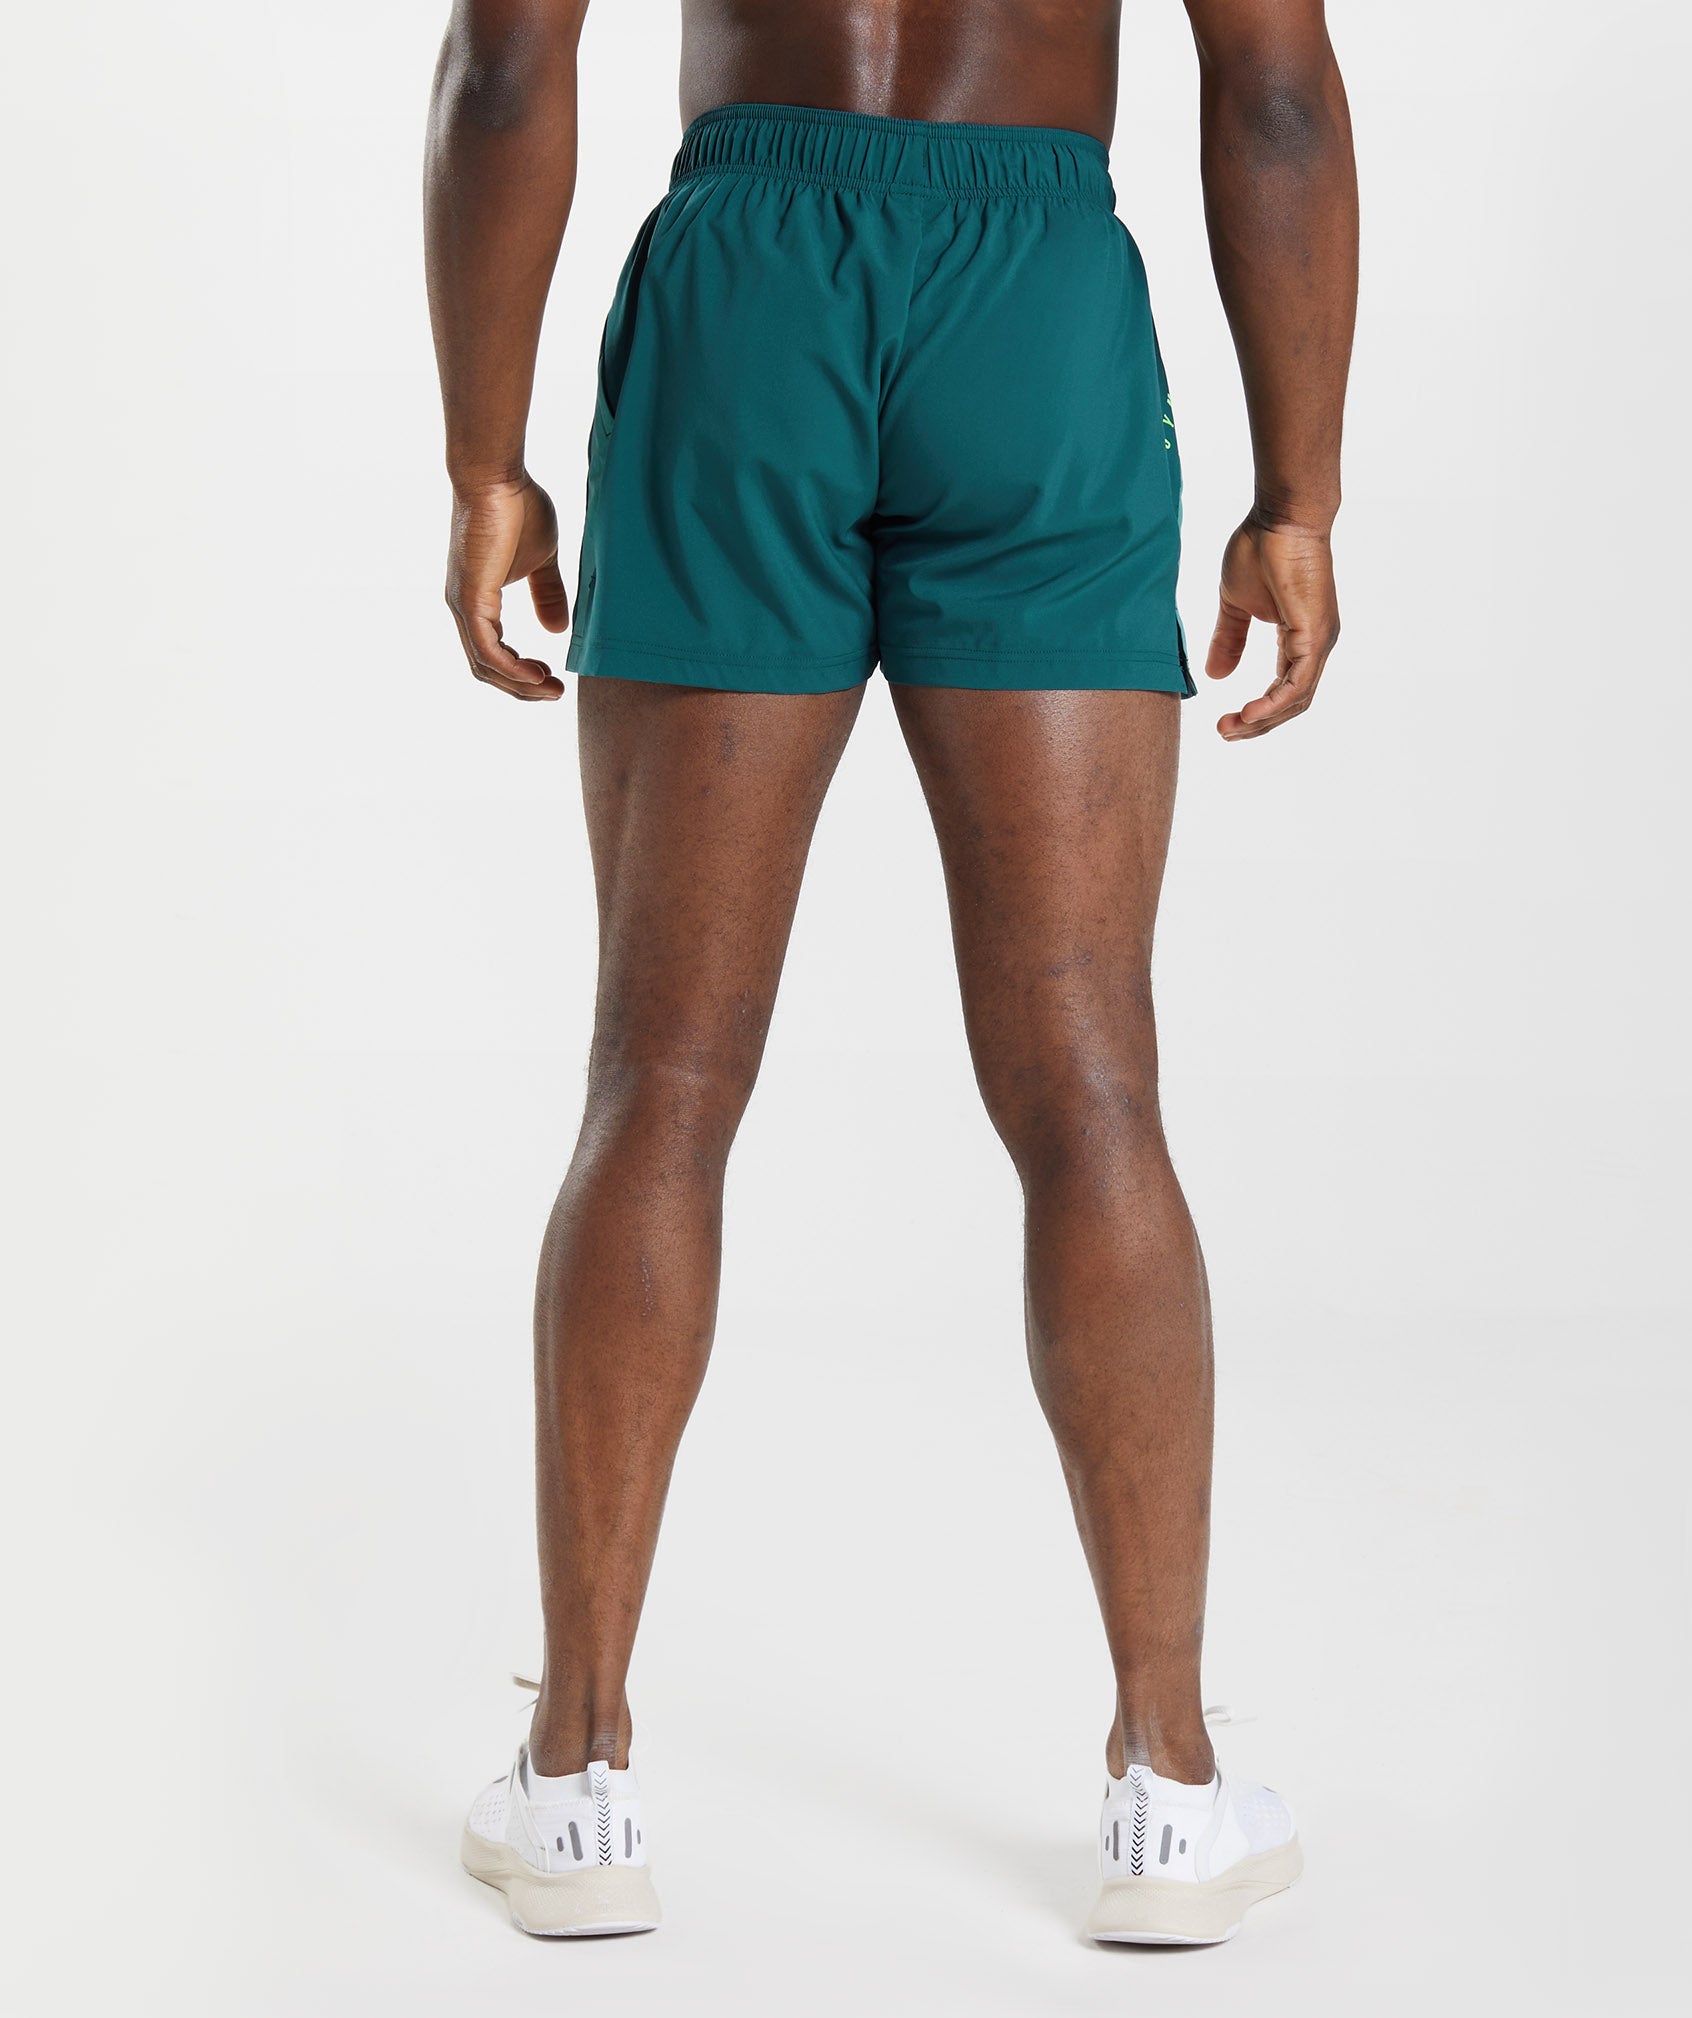 Sport 5" Shorts in Winter Teal/Slate Blue - view 2